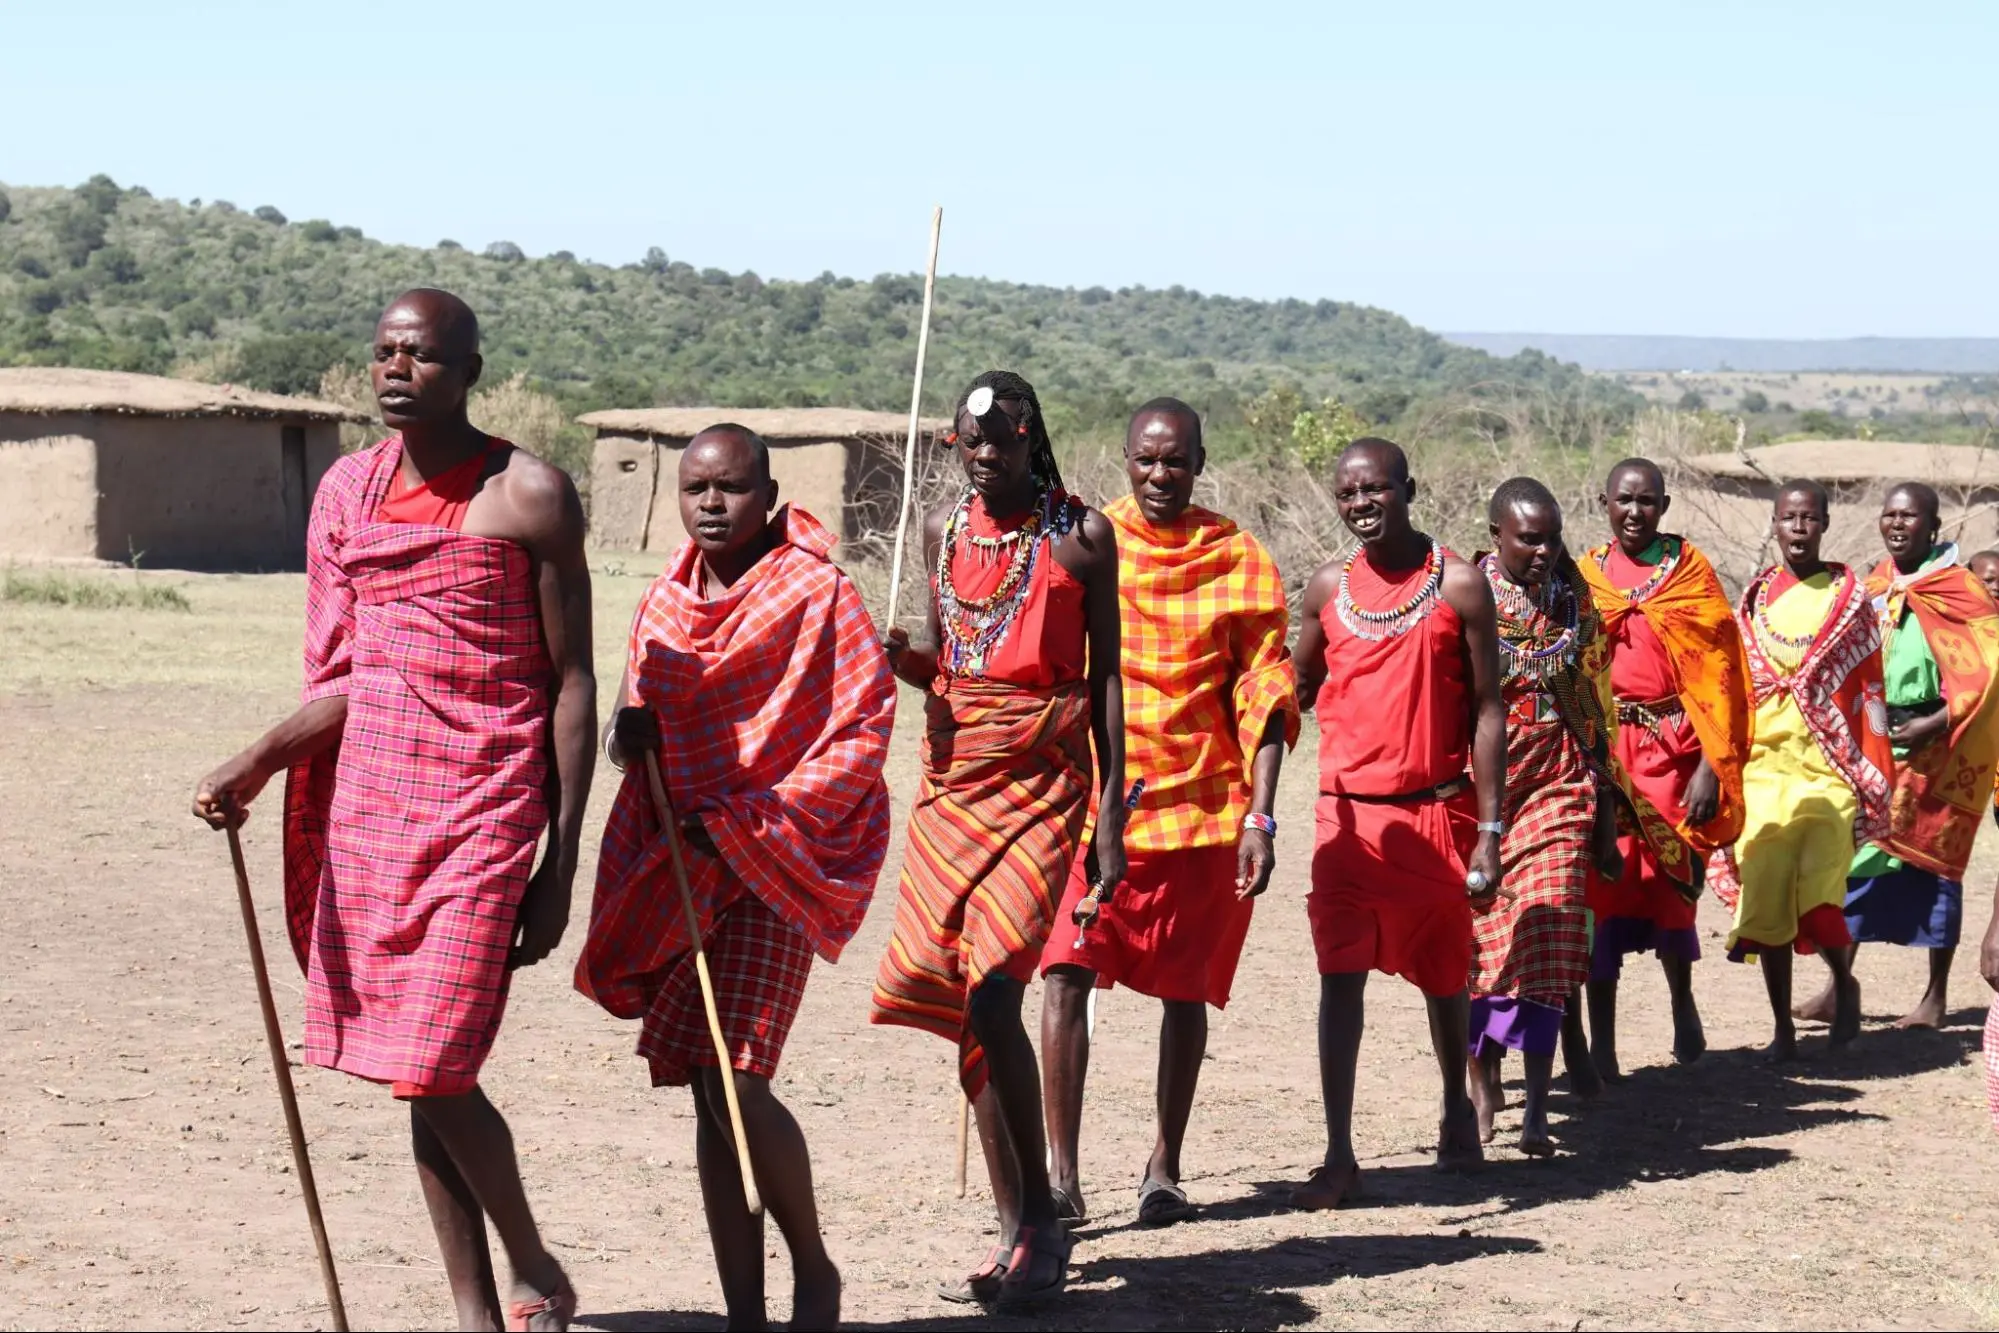 A multicultural gathering of individuals taking a leisurely walk in the local community of Serengeti, Tanzania.